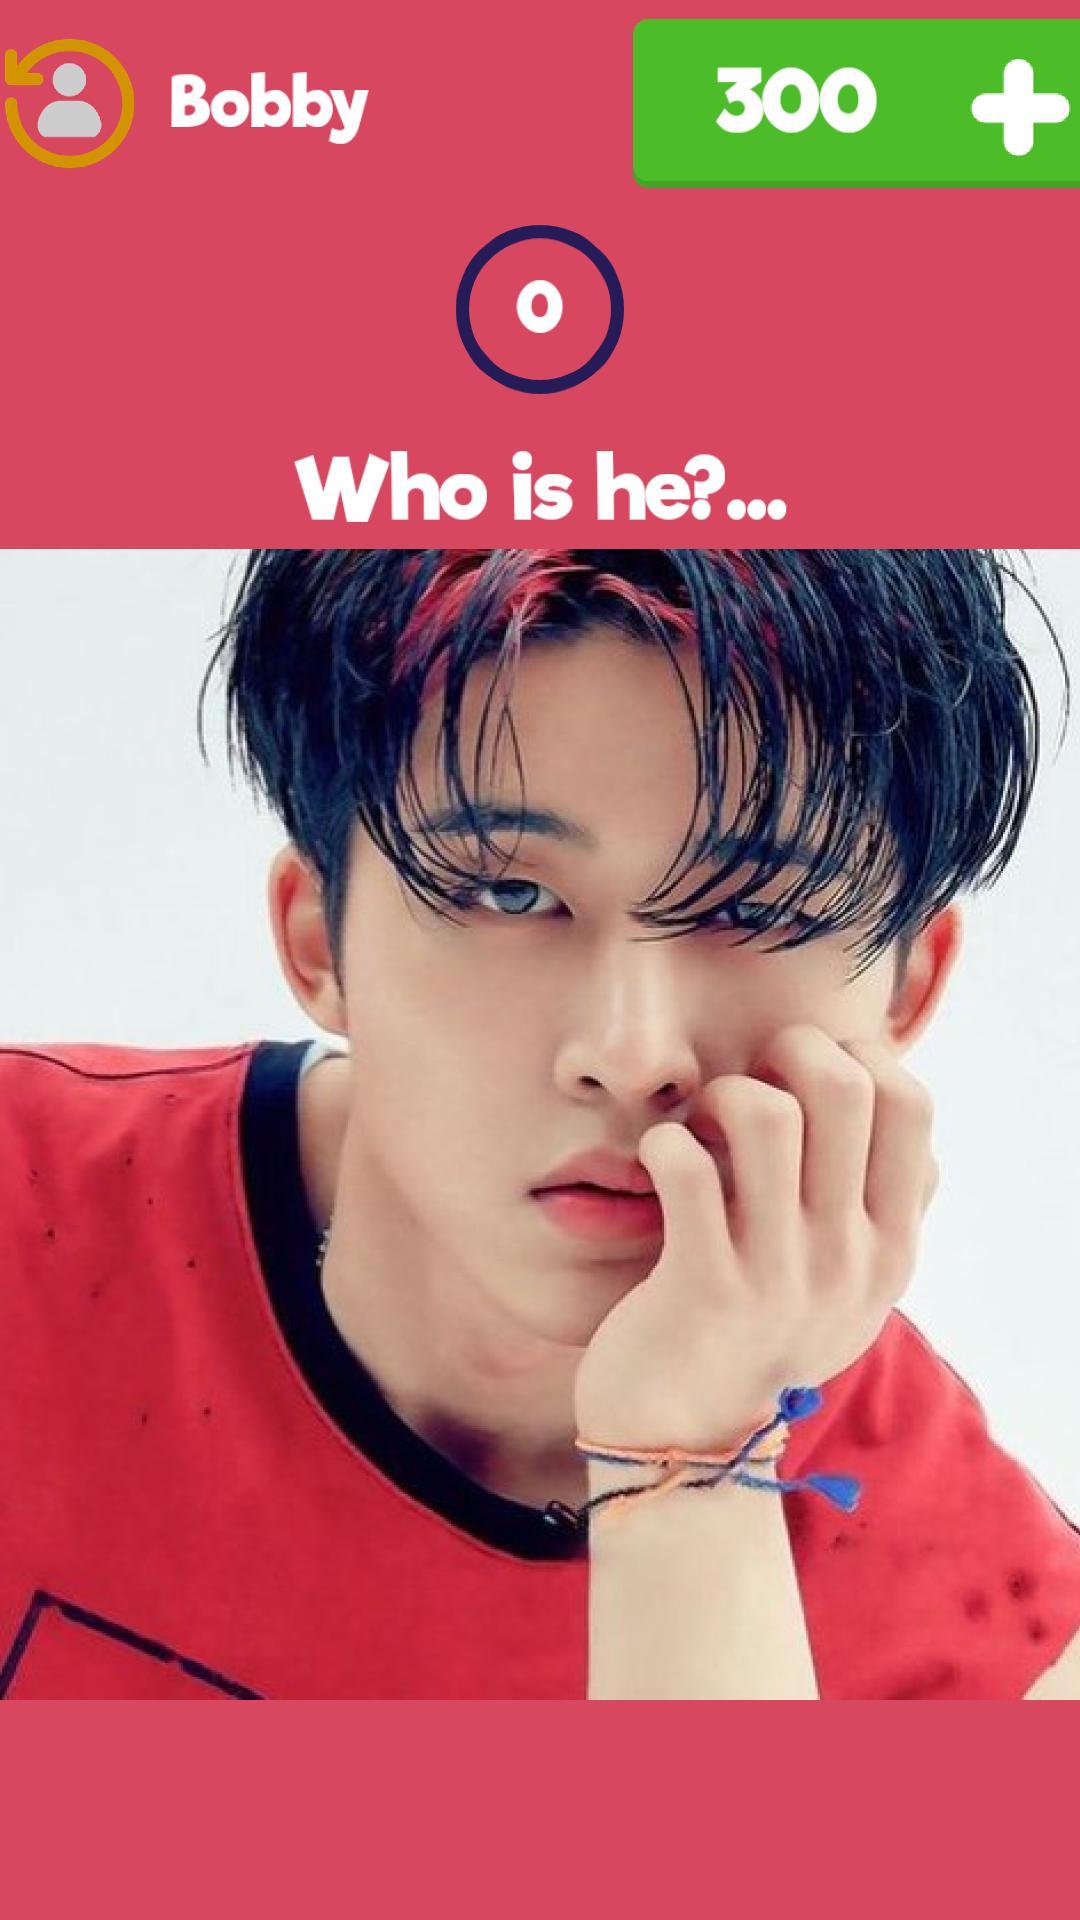 Guess IKON Member for Android - APK Download